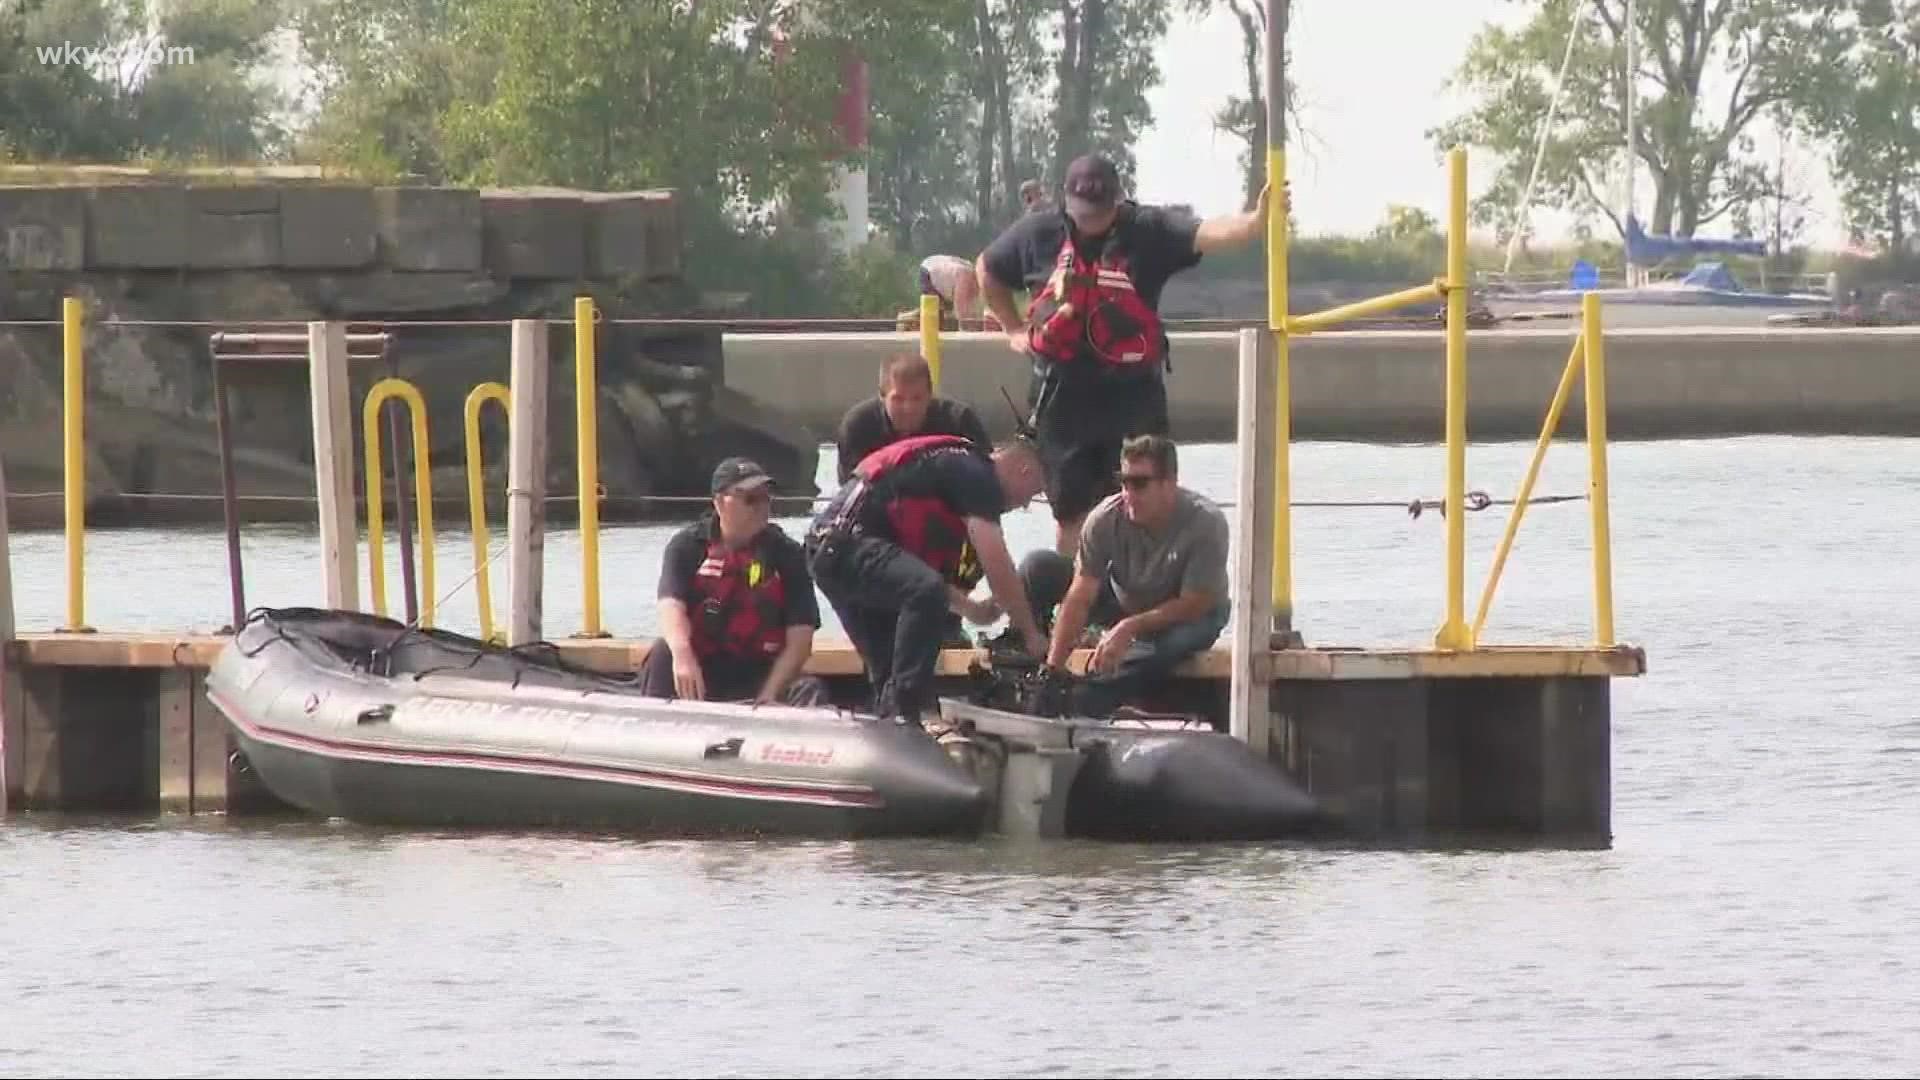 The Lake County marine patrol will continue to search, but the sheriff says its dive team has covered the area as best as possible and will not be out again.